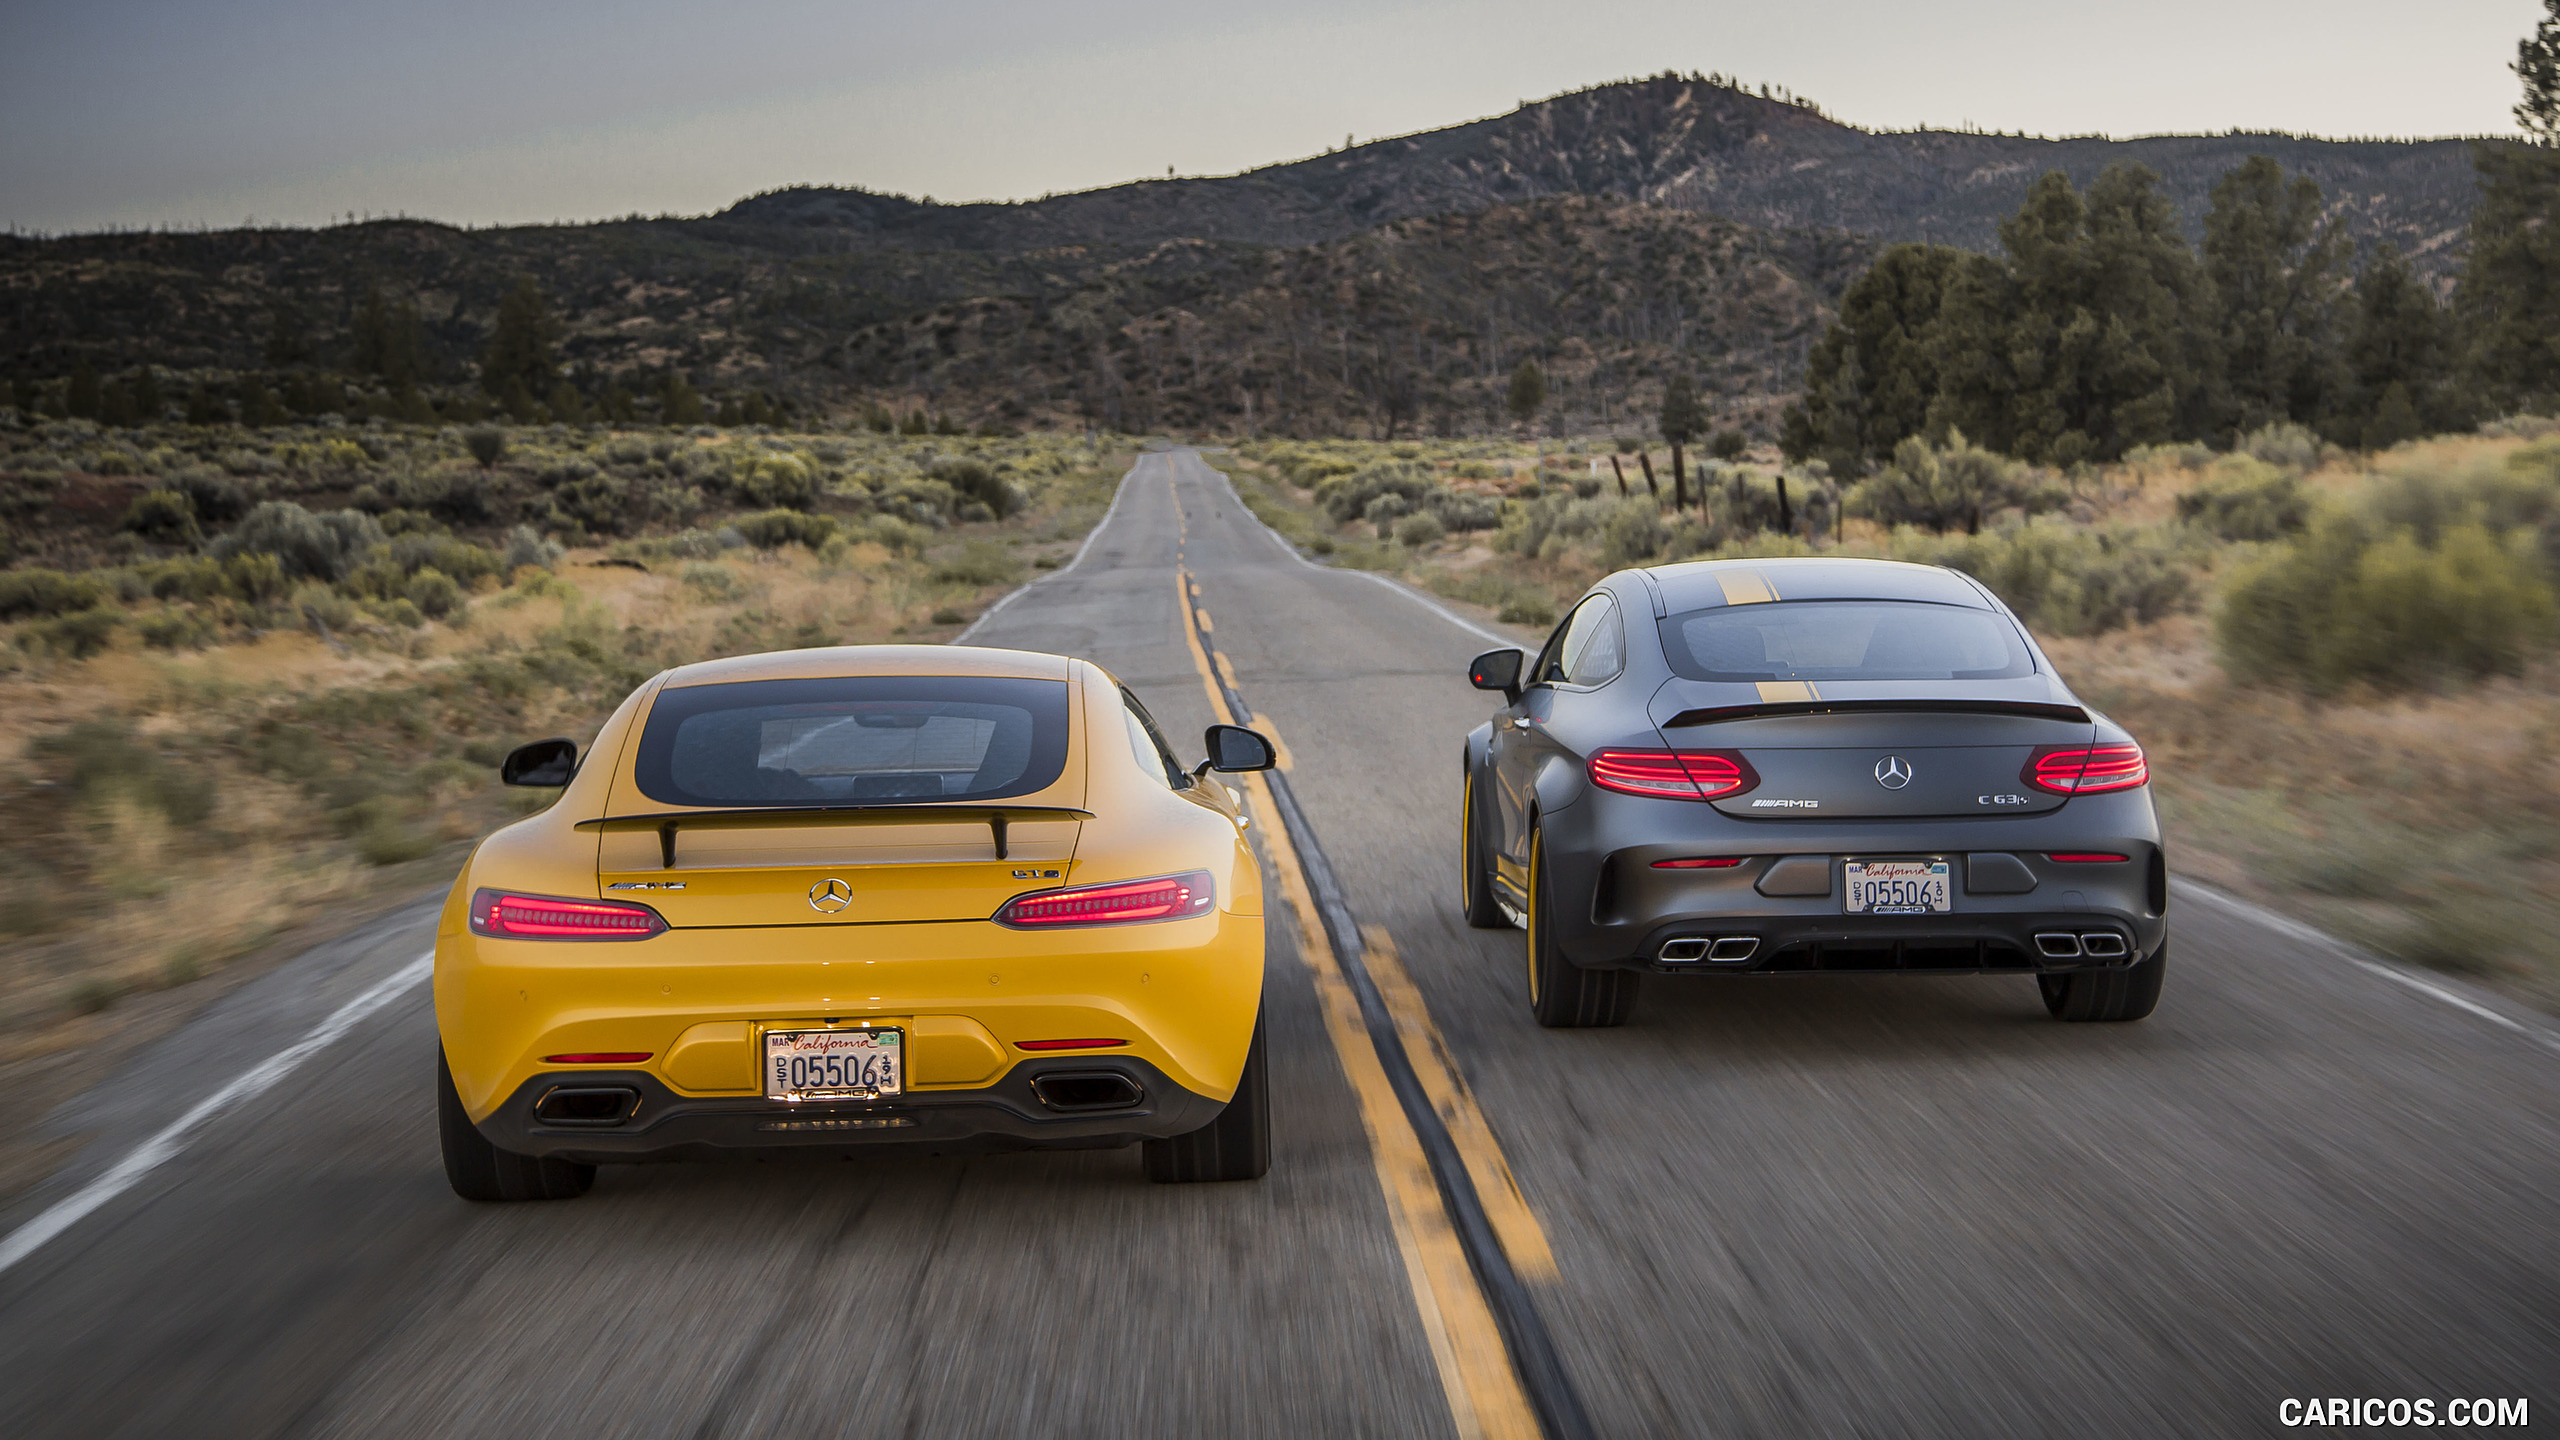 2017 Mercedes-AMG C63 S Coupe Edition One (US-Spec) and 2017 Mercedes-AMG GT S Coupe, #82 of 86